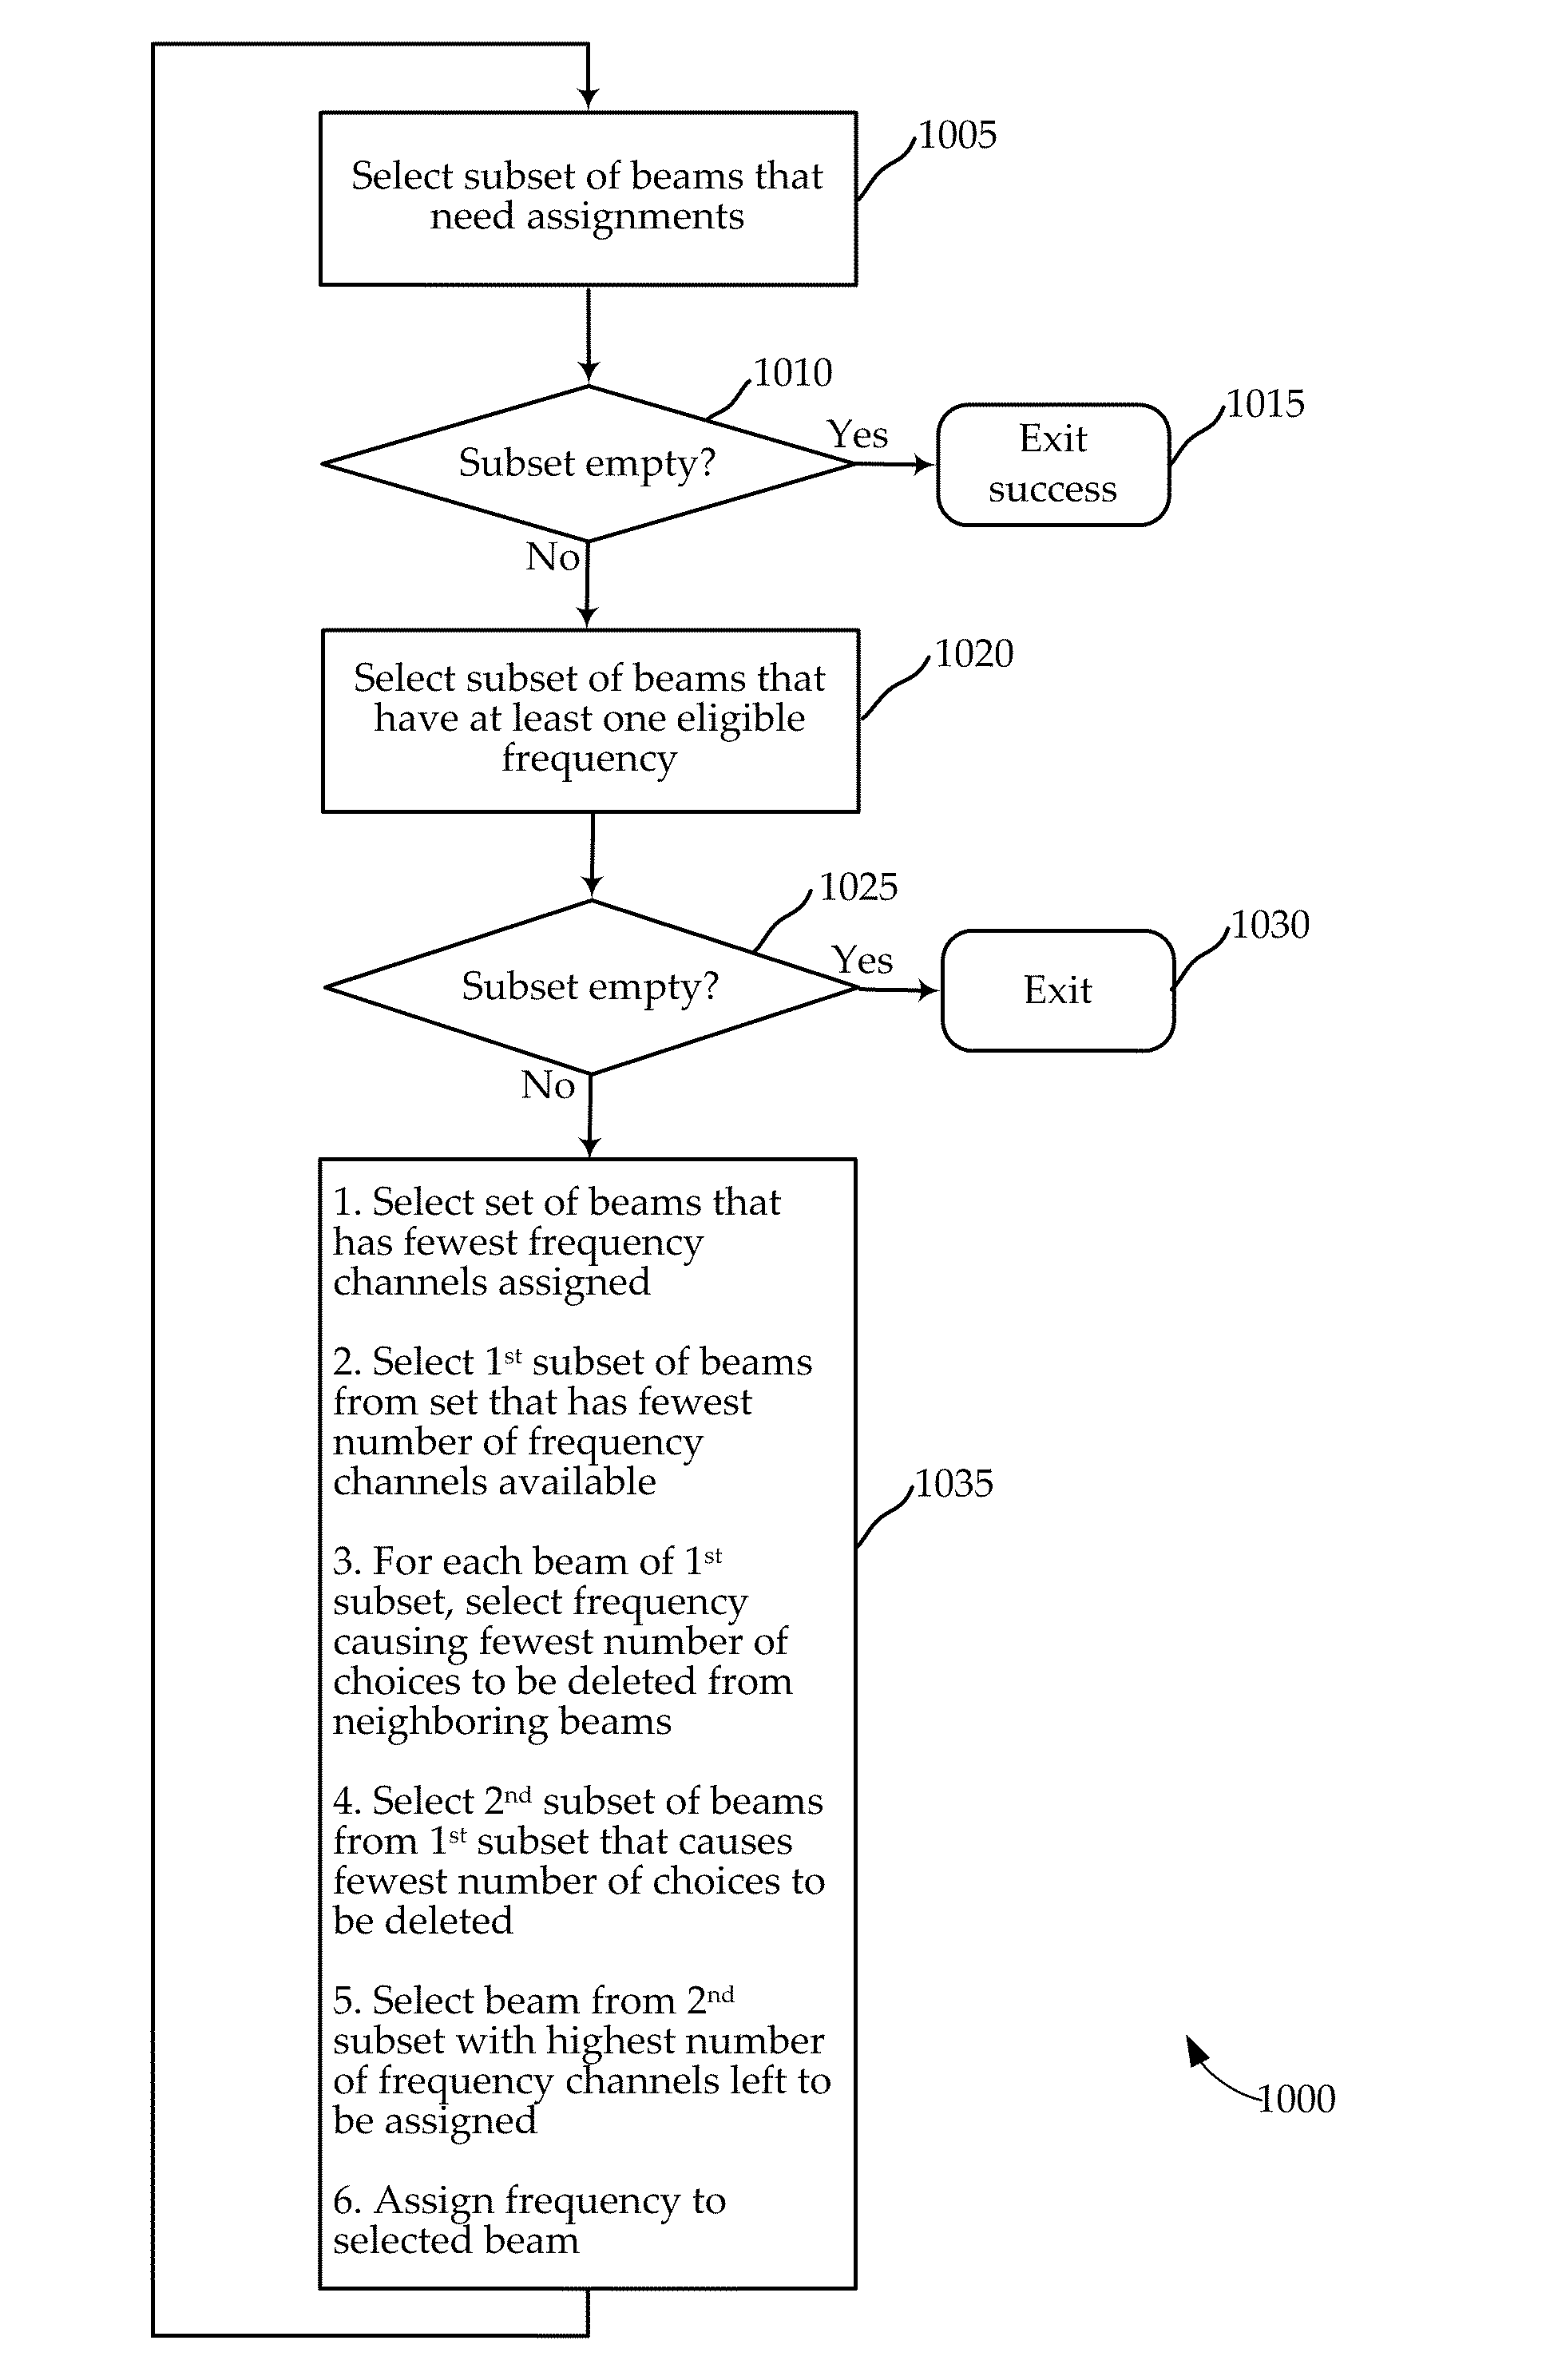 Dynamic frequency assignment in a multi-beam system